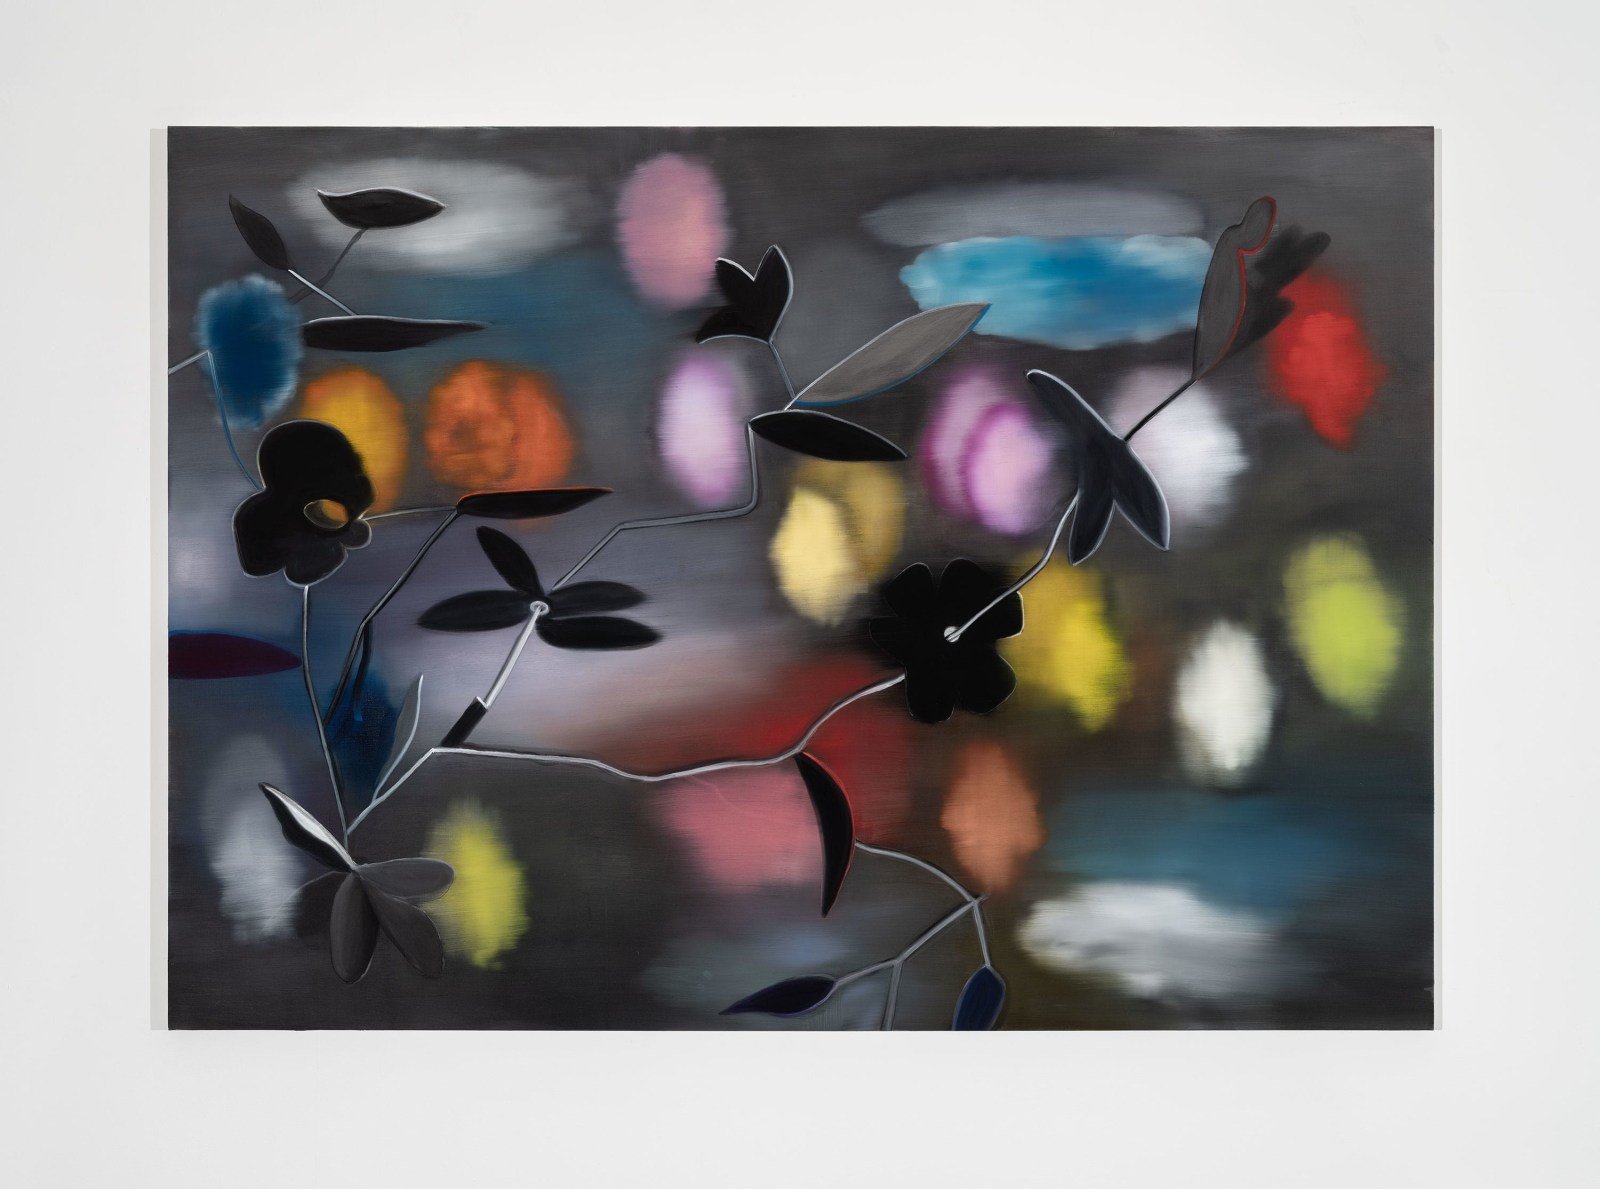 Ross Bleckner, Day and Night, Hour by Hour